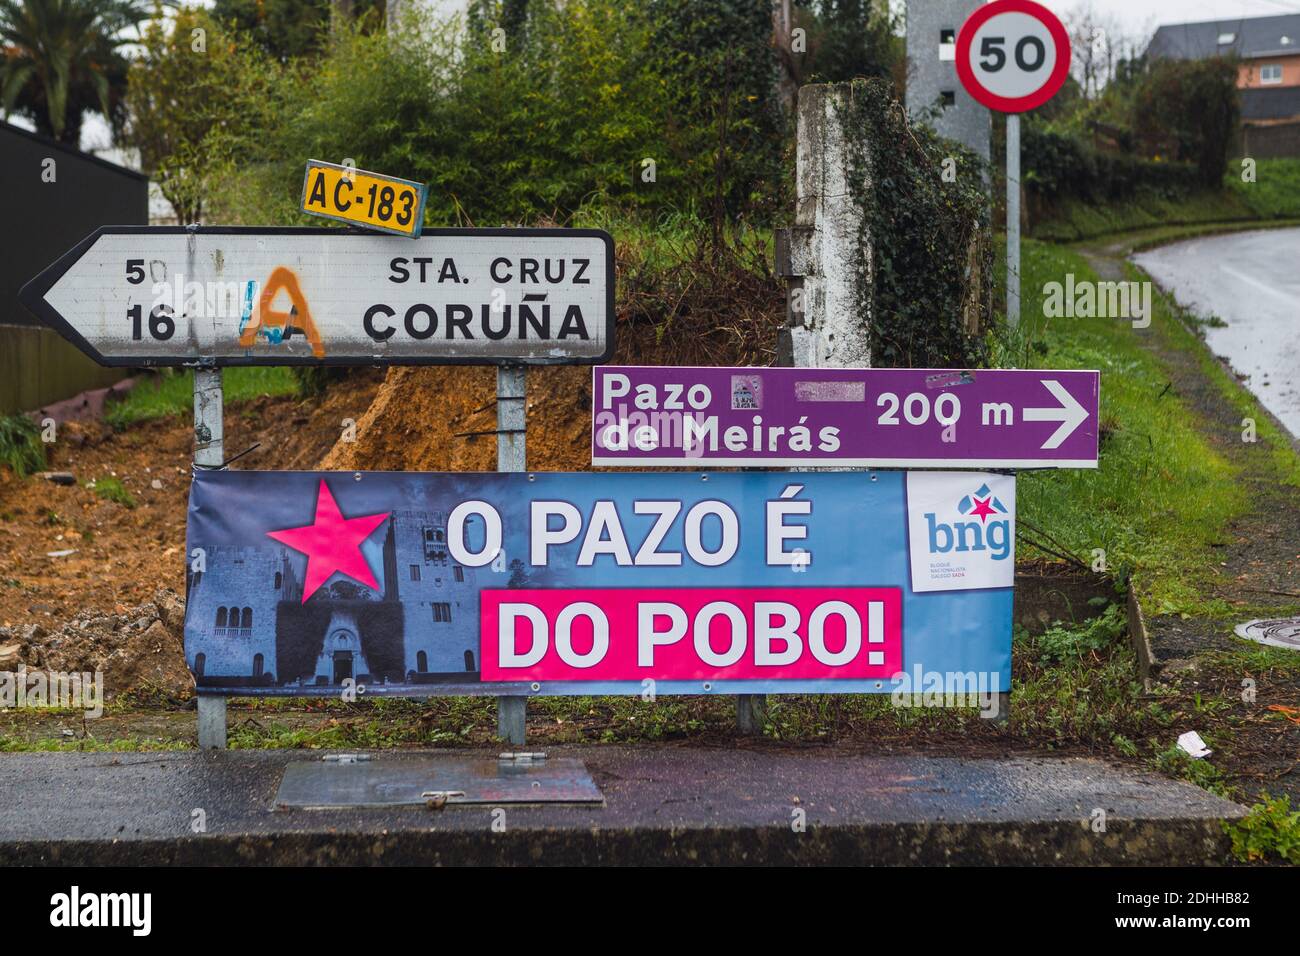 Meirás-Coruna-Spain. Poster placed next to several kilometric signs that indicates that the pazo de Meiras belongs to the town on December 10, 2020 Stock Photo